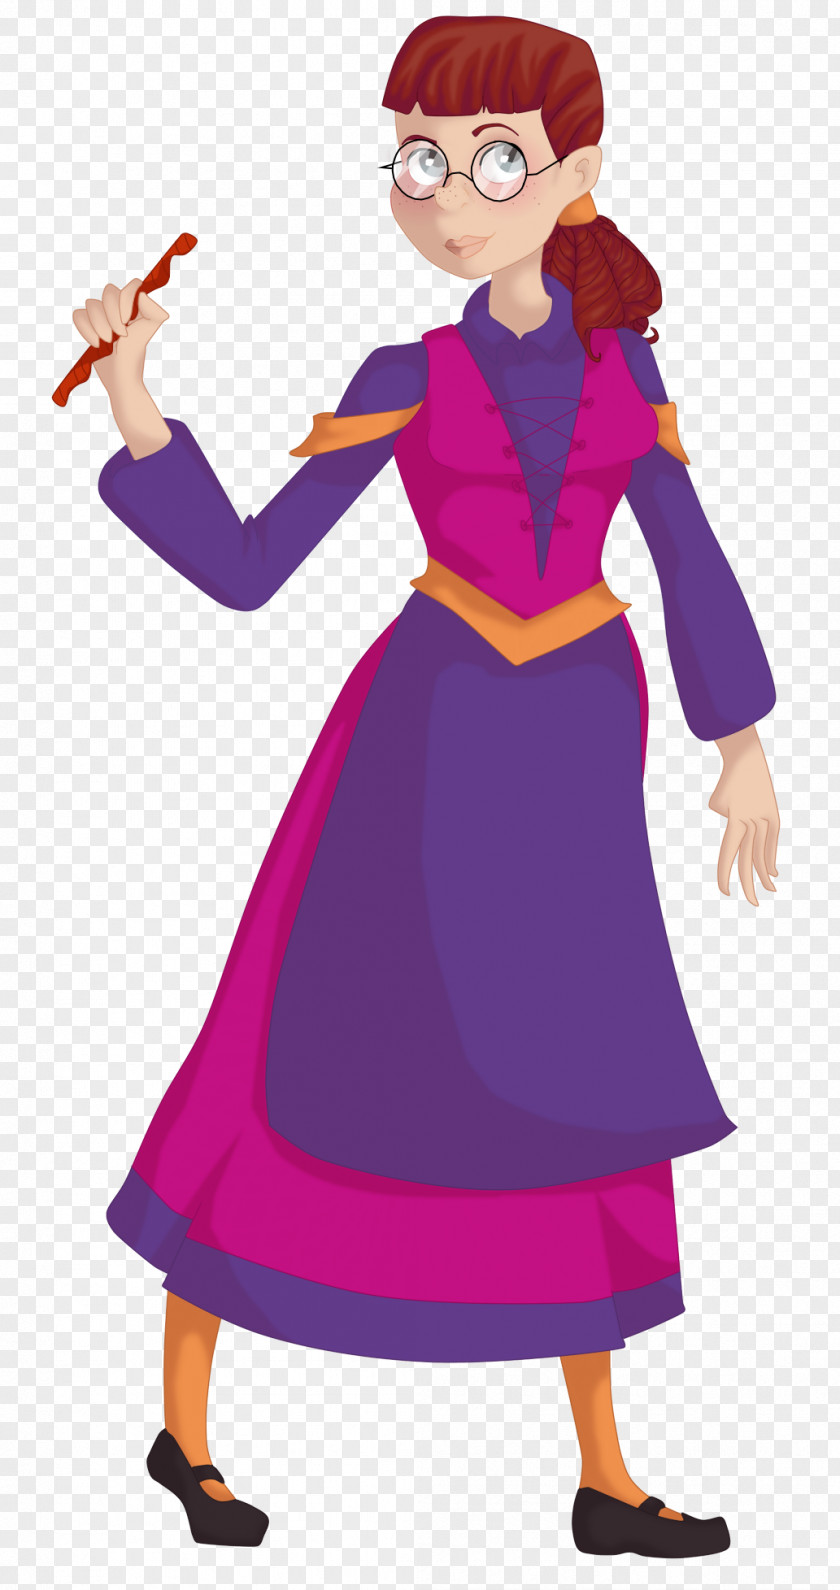 Sofia The First Castle Costume Design Character Clip Art PNG